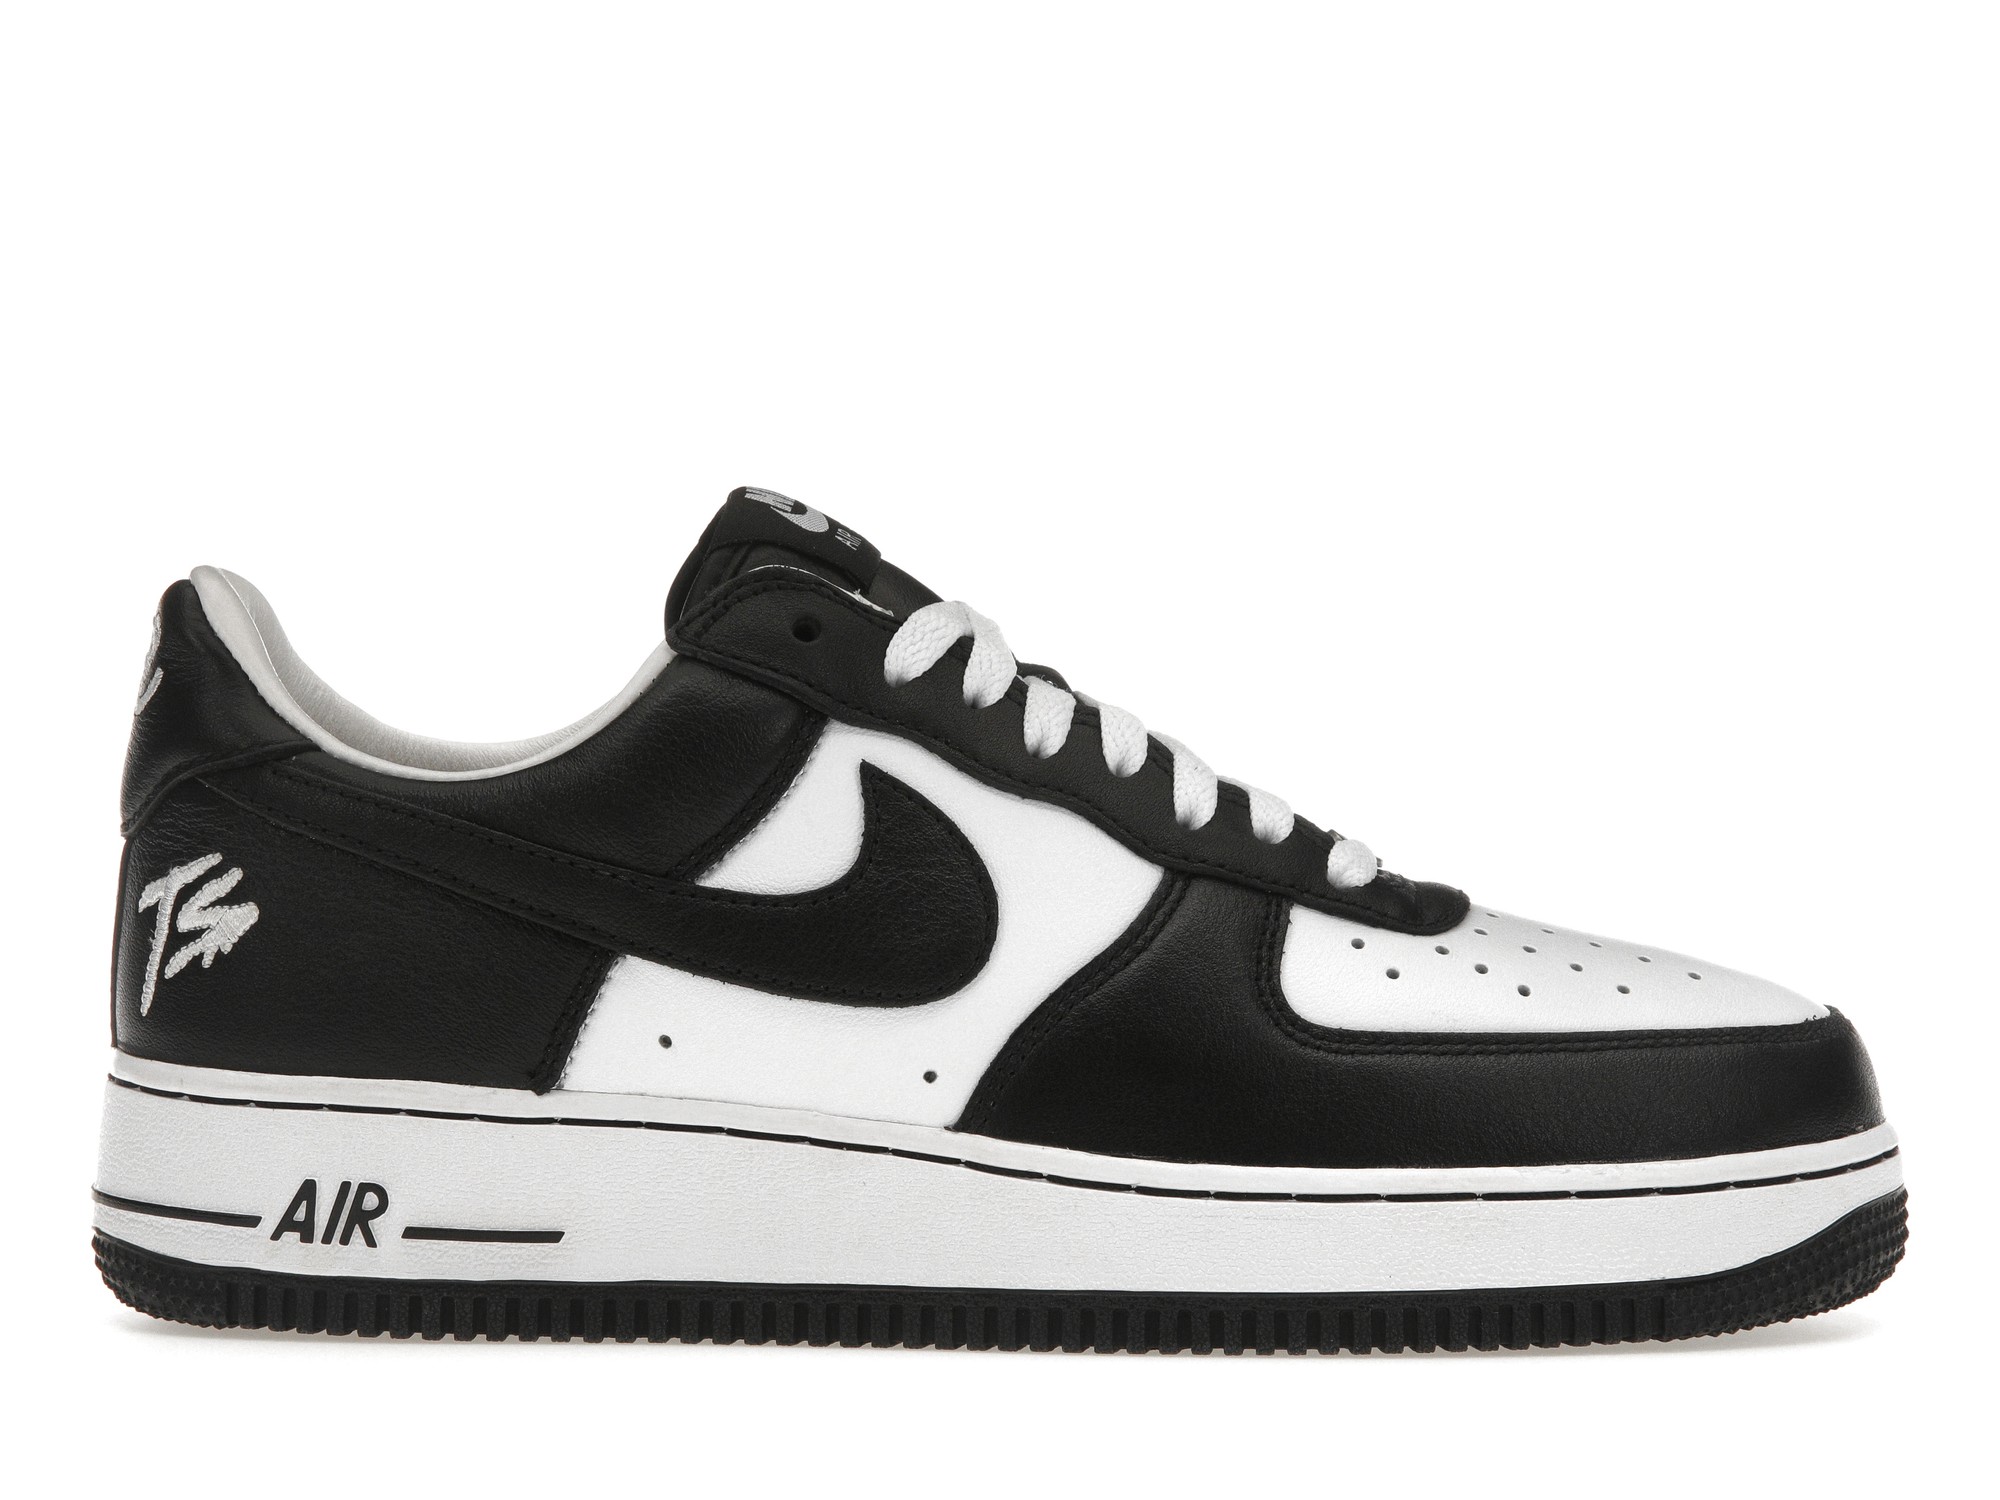 Terror Squad Nike Air Force 1 Low 26.5cm